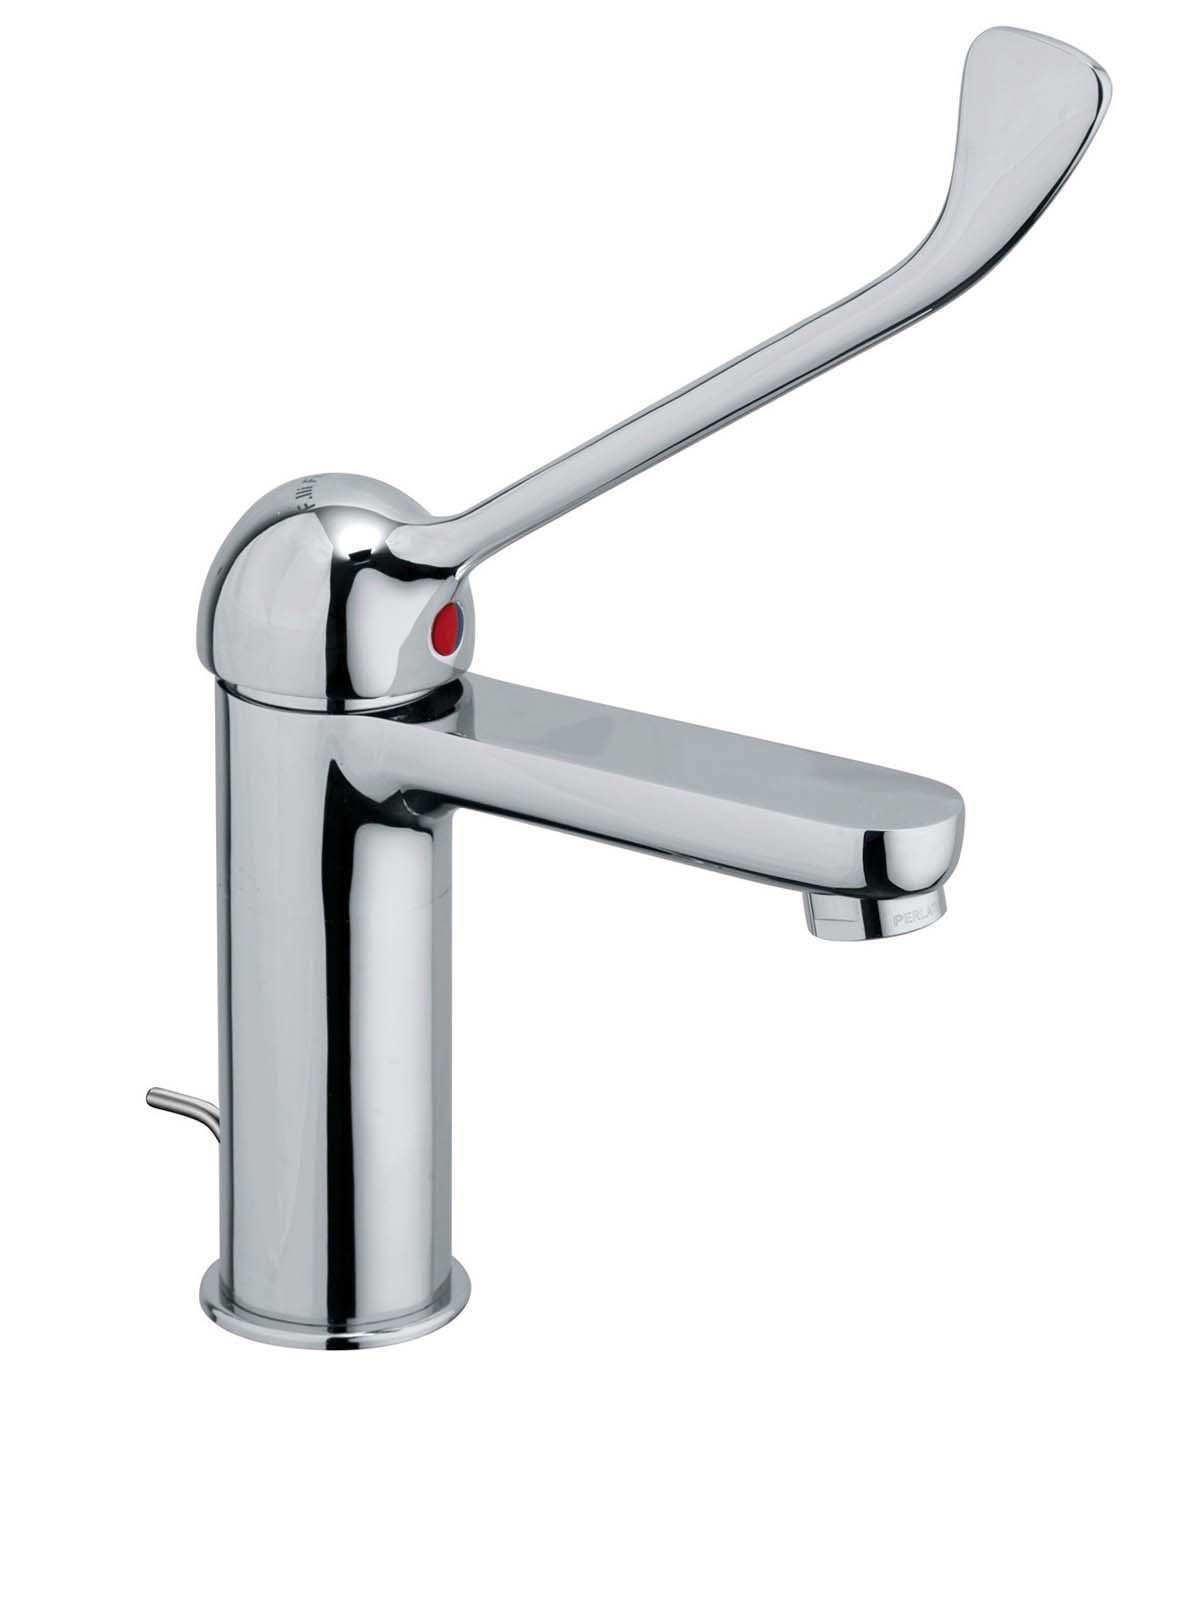 Long-lever washbasin mixer with pop-up waste